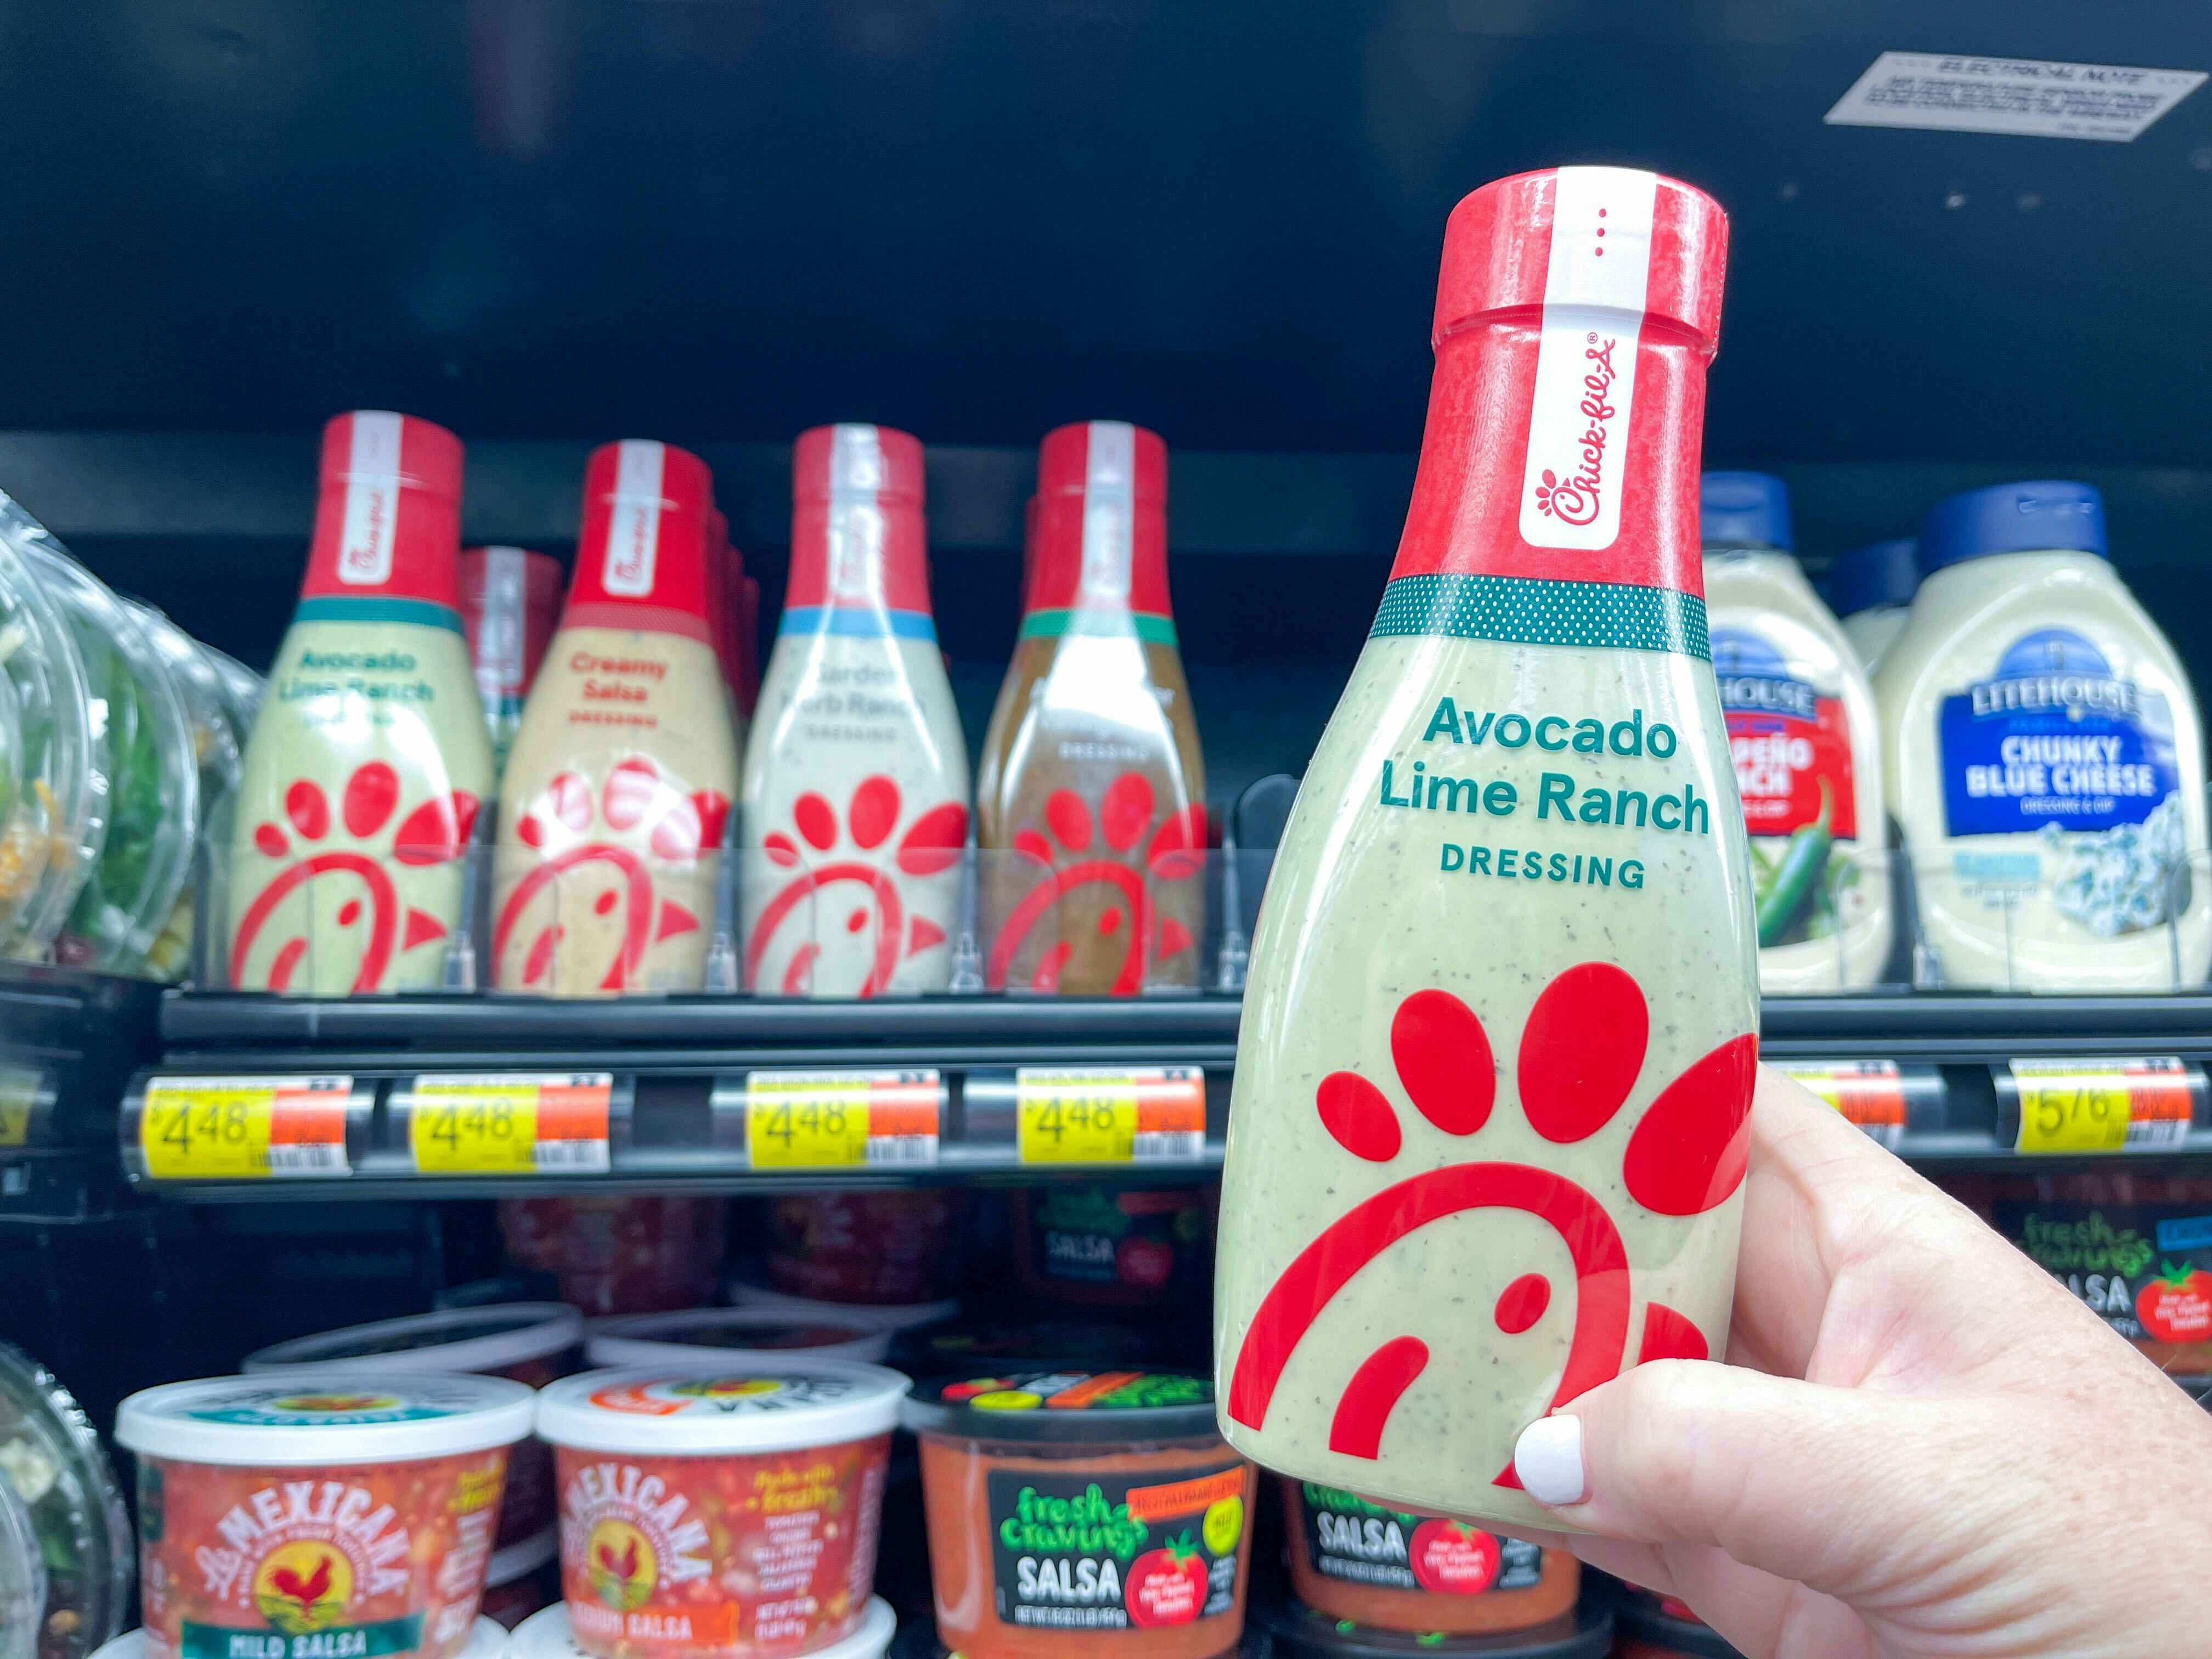 Chick-fil-A salad dressings, Bottles to purchase